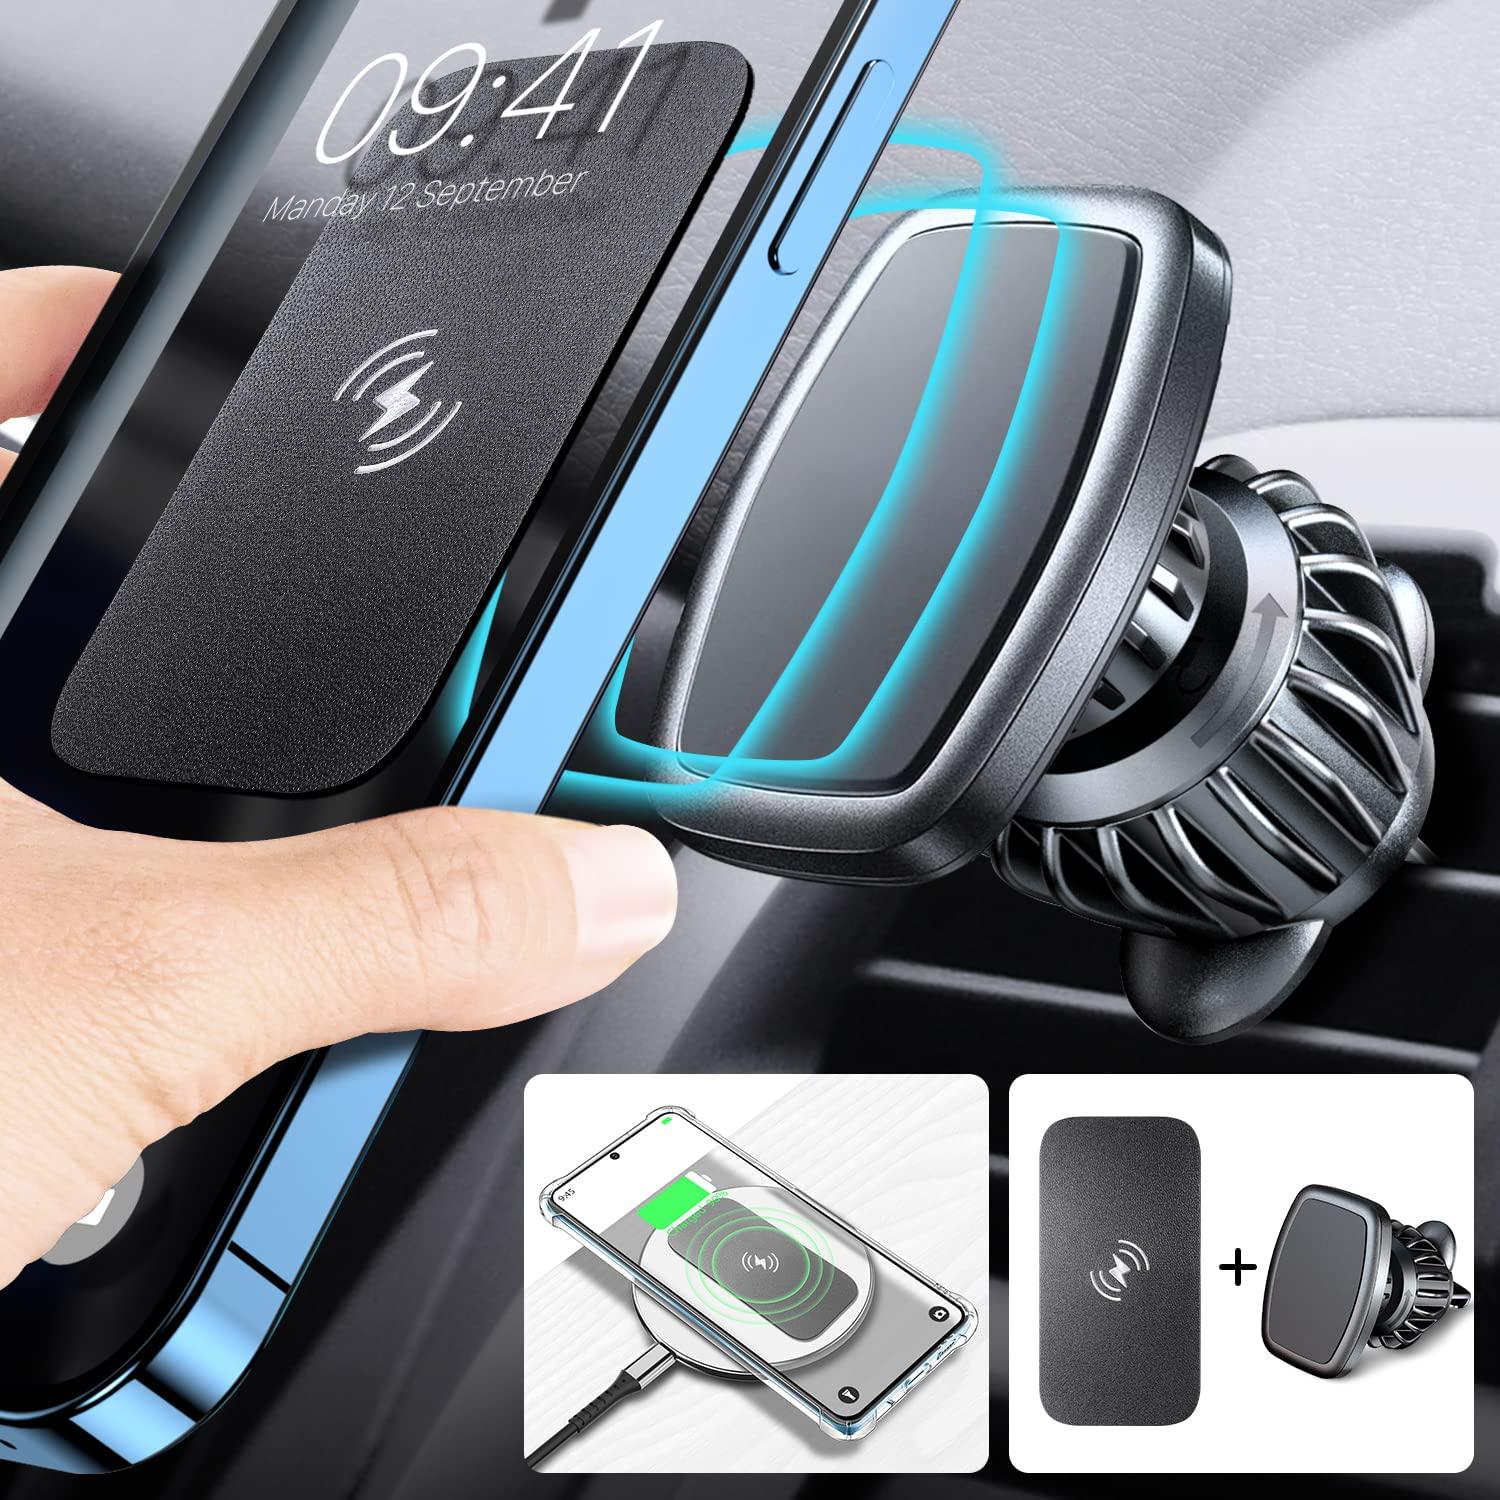 eSamcore, eSamcore Cell Phone Magnet Sticker Allows Wireless Charging, Comes with Magnetic Phone Mount for car, Soft Magnetic Plate for car Phone Holder Mount Vent Clip Compatible with Samsung Galaxy iPhone